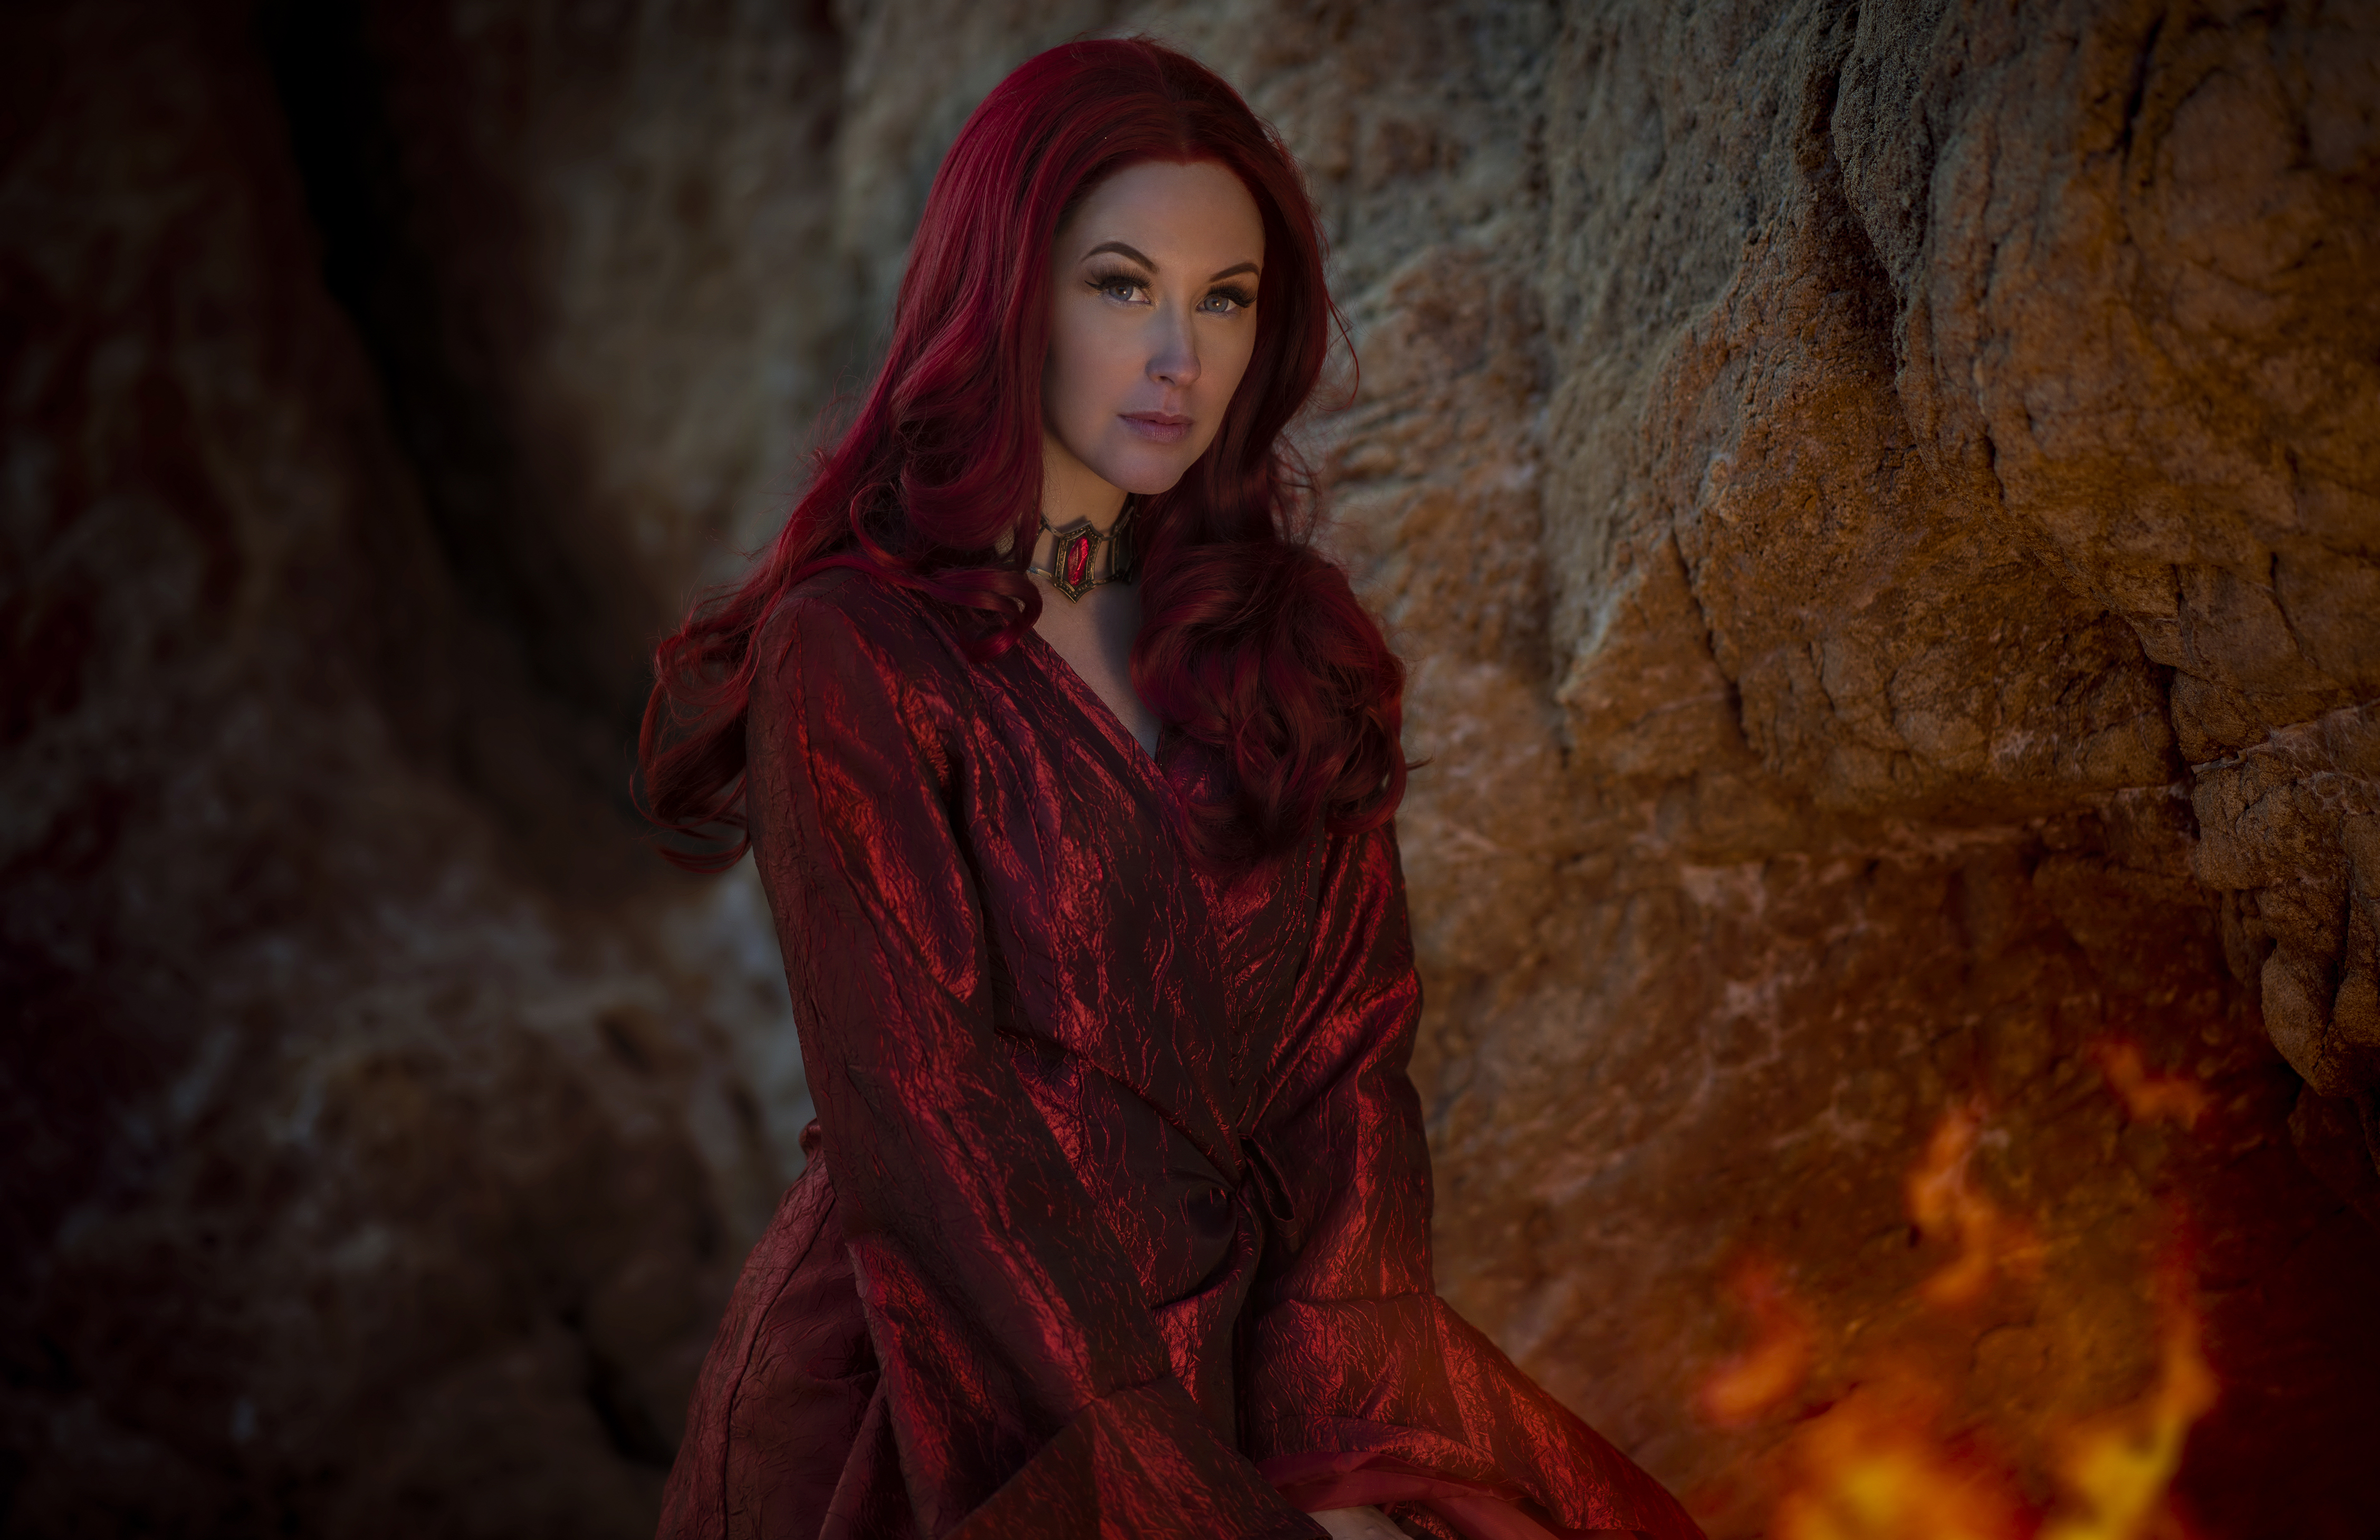 People 4511x2919 Meg Turney Melisandre witch redhead Game of Thrones fantasy girl cosplay women